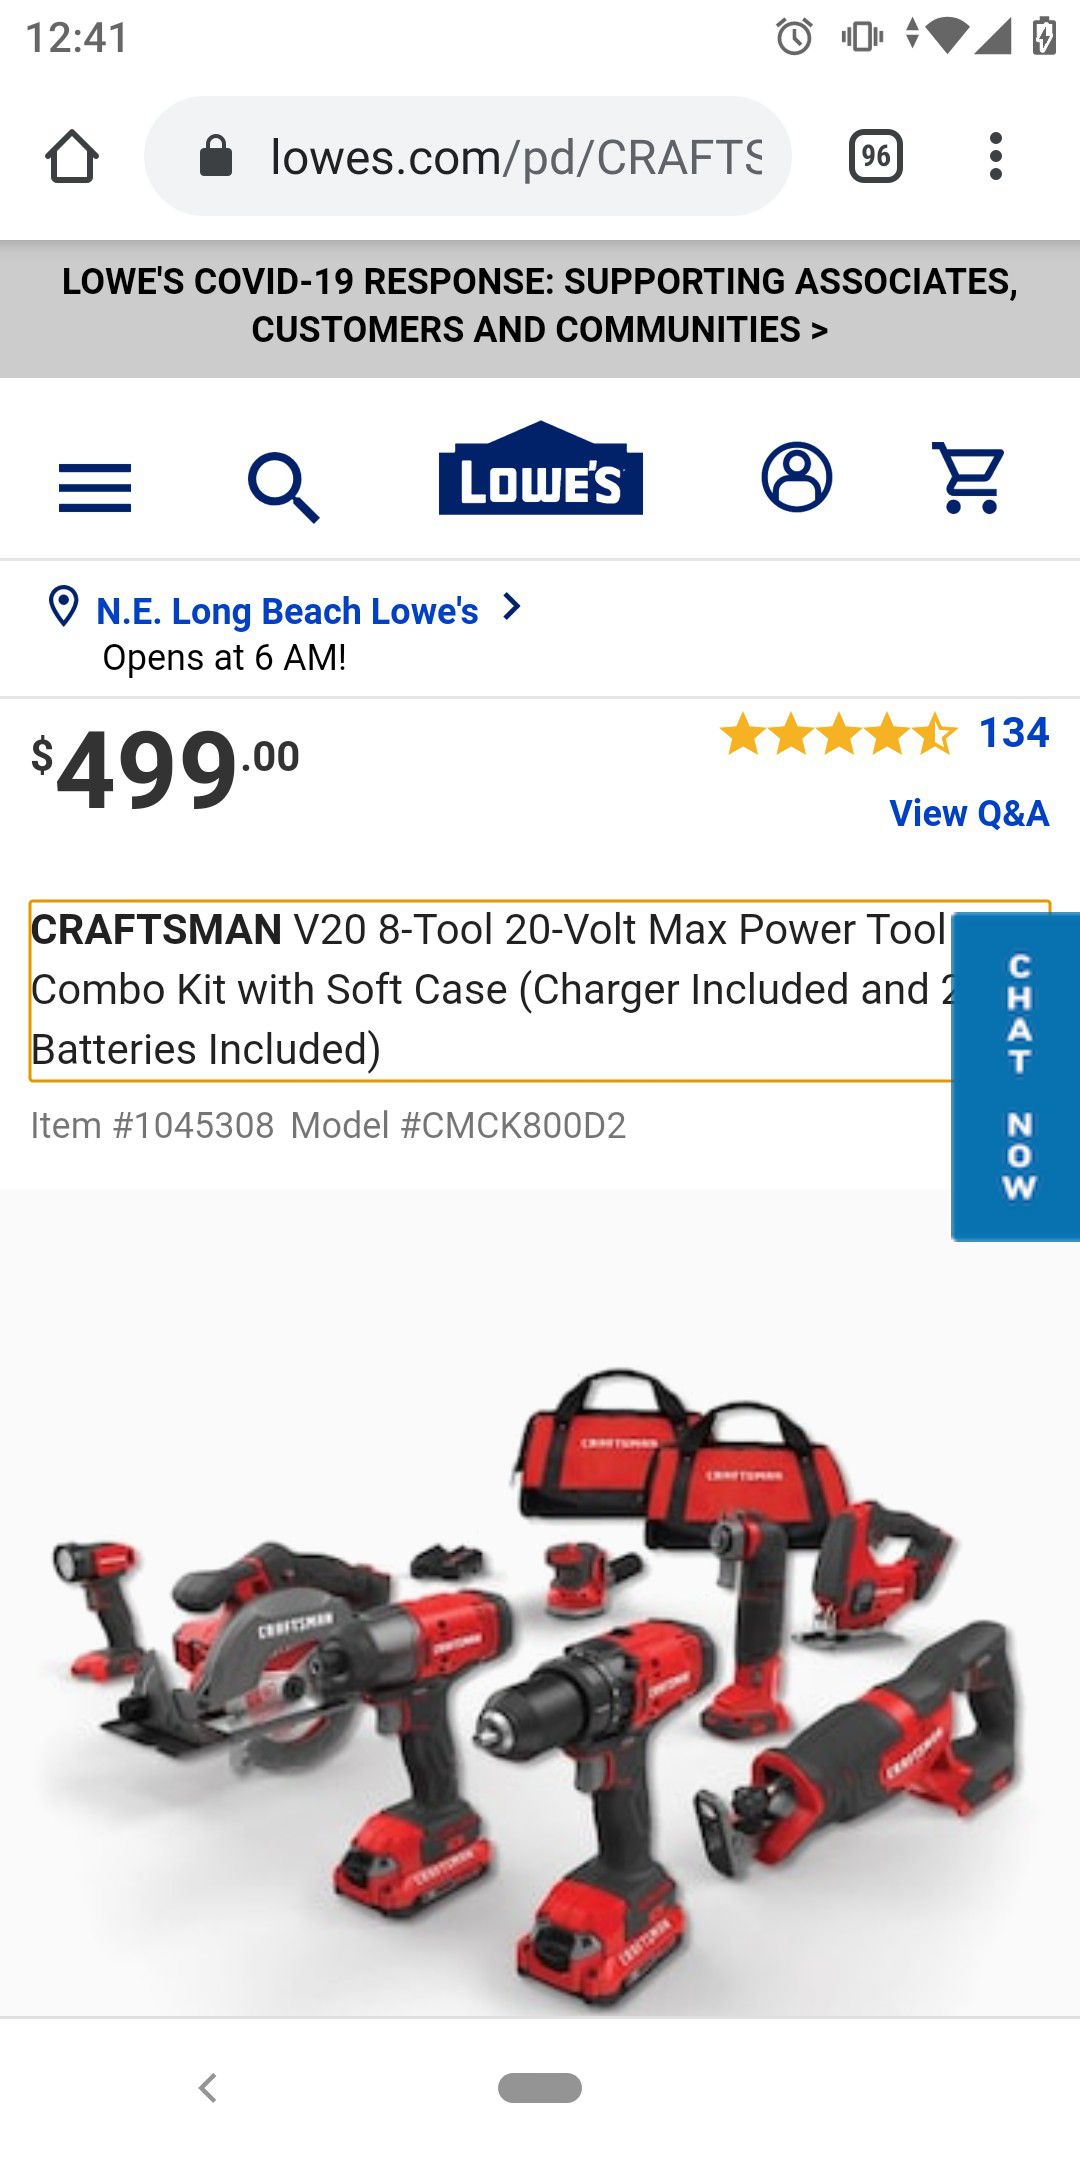 CRAFTSMAN Max Power Tool Combo Kit (Charger Included and 3-Batteries Included)